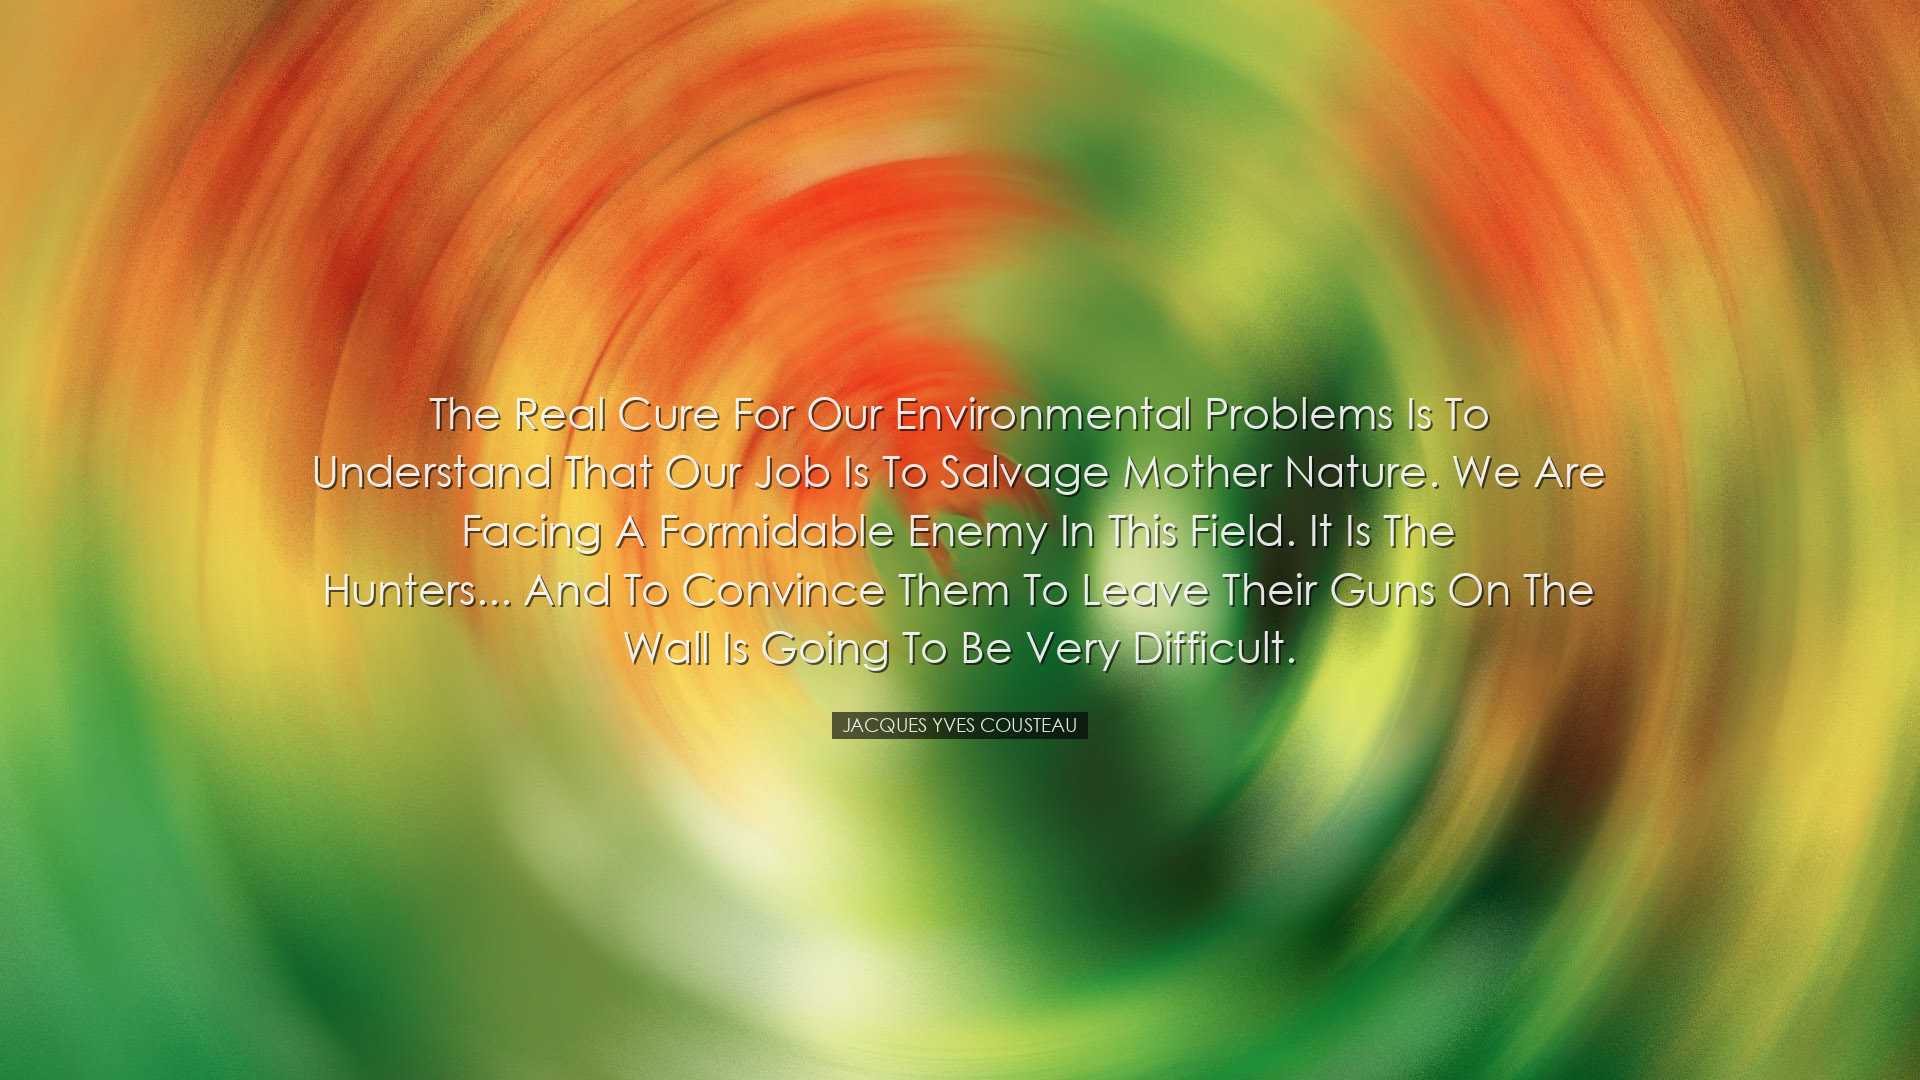 The real cure for our environmental problems is to understand that